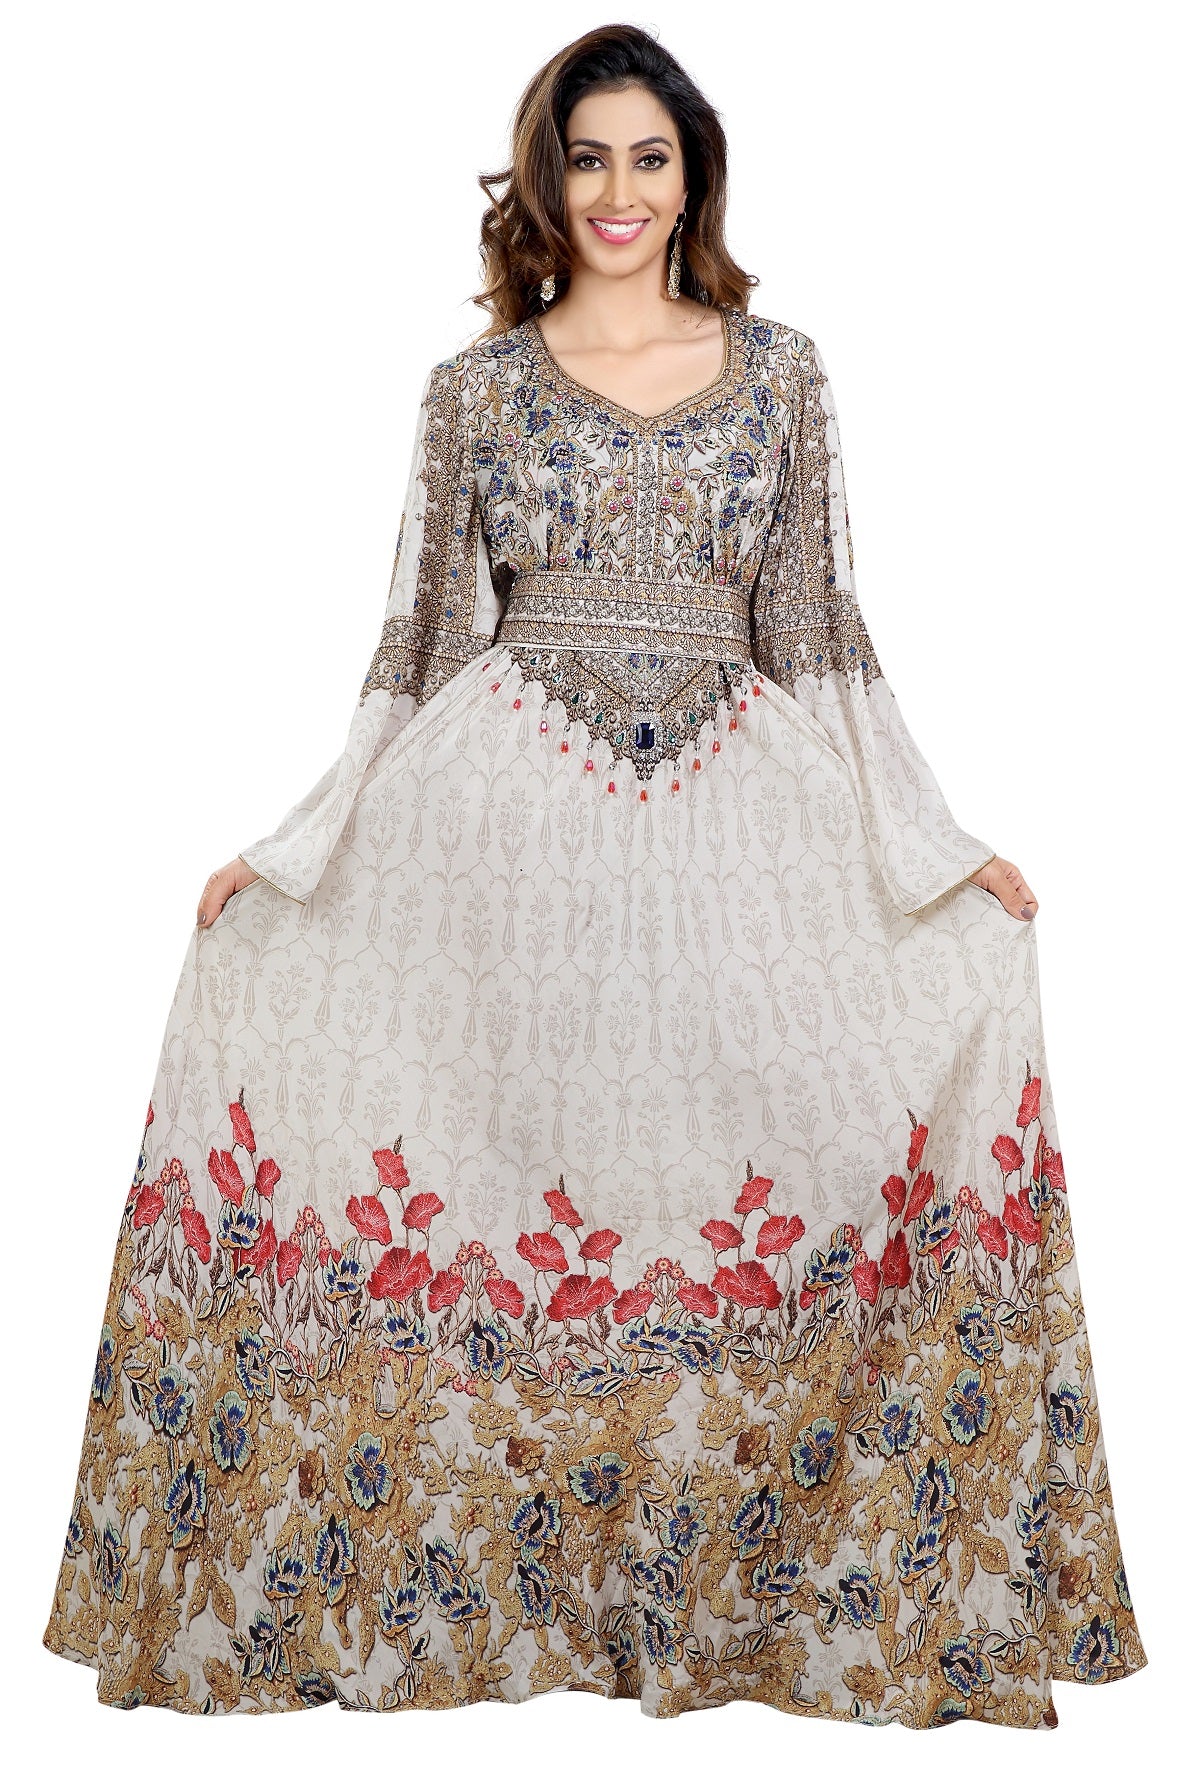 Floral Digital Printed Maxi with Multi colour Beads - Maxim Creation